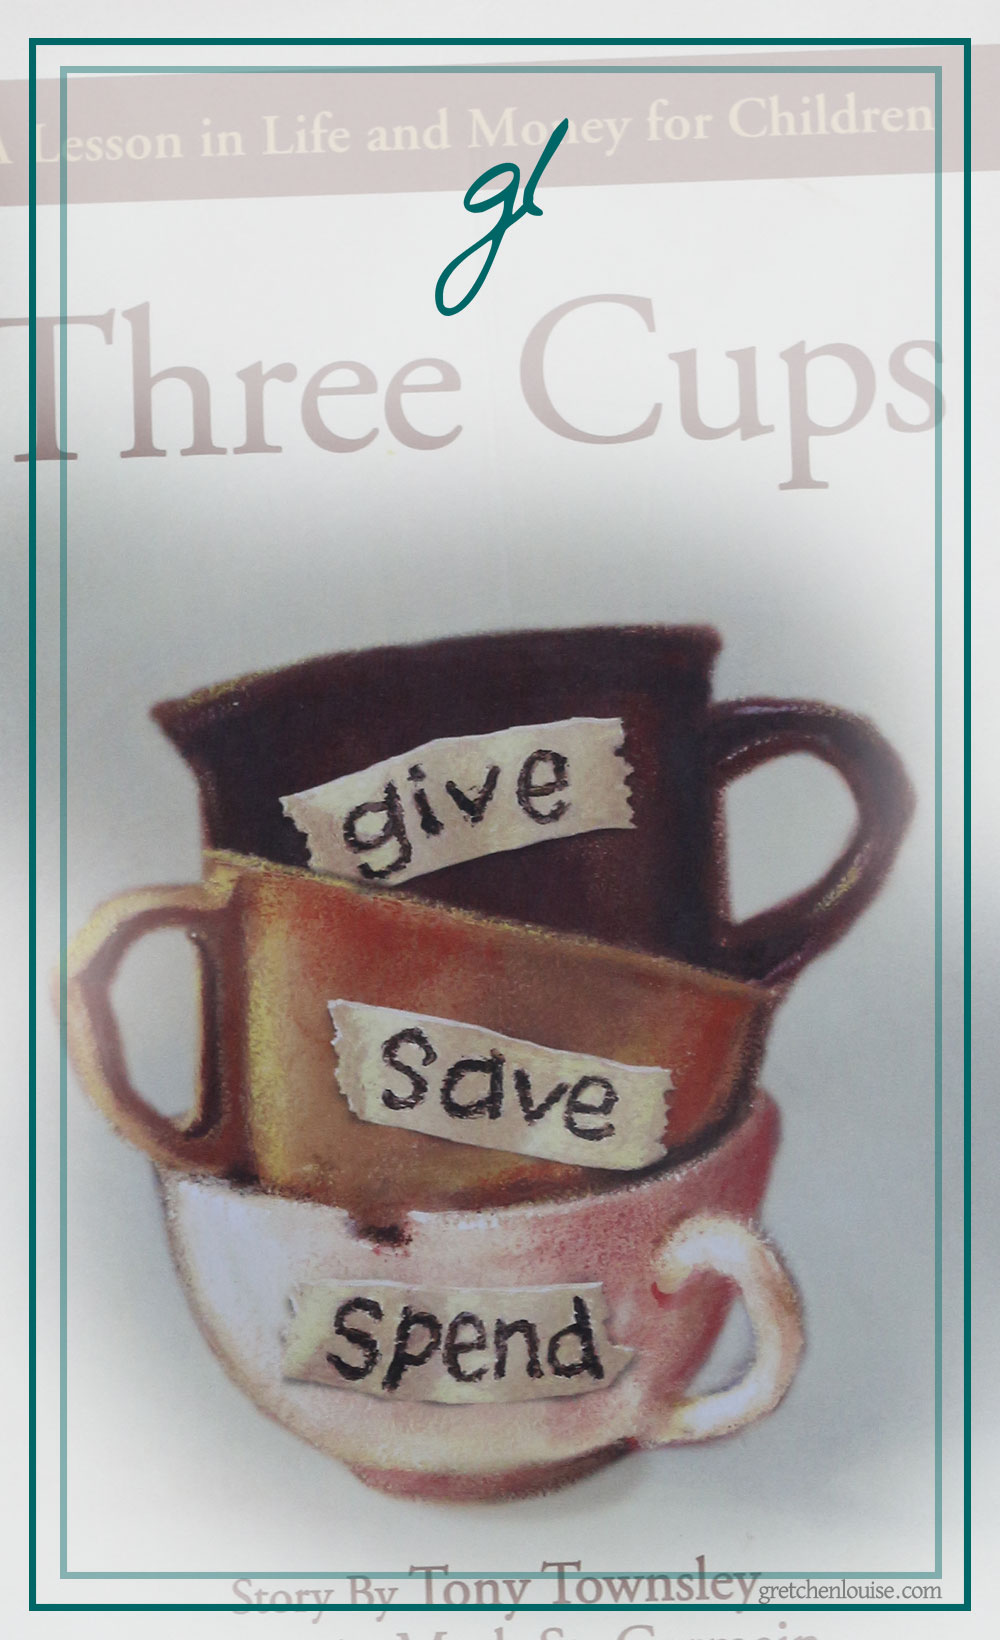 A great read-loud about money and finances, Three Cups is a children's book that simply and clearly depicting the long-term benefits of giving, saving, and spending. via @GretLouise